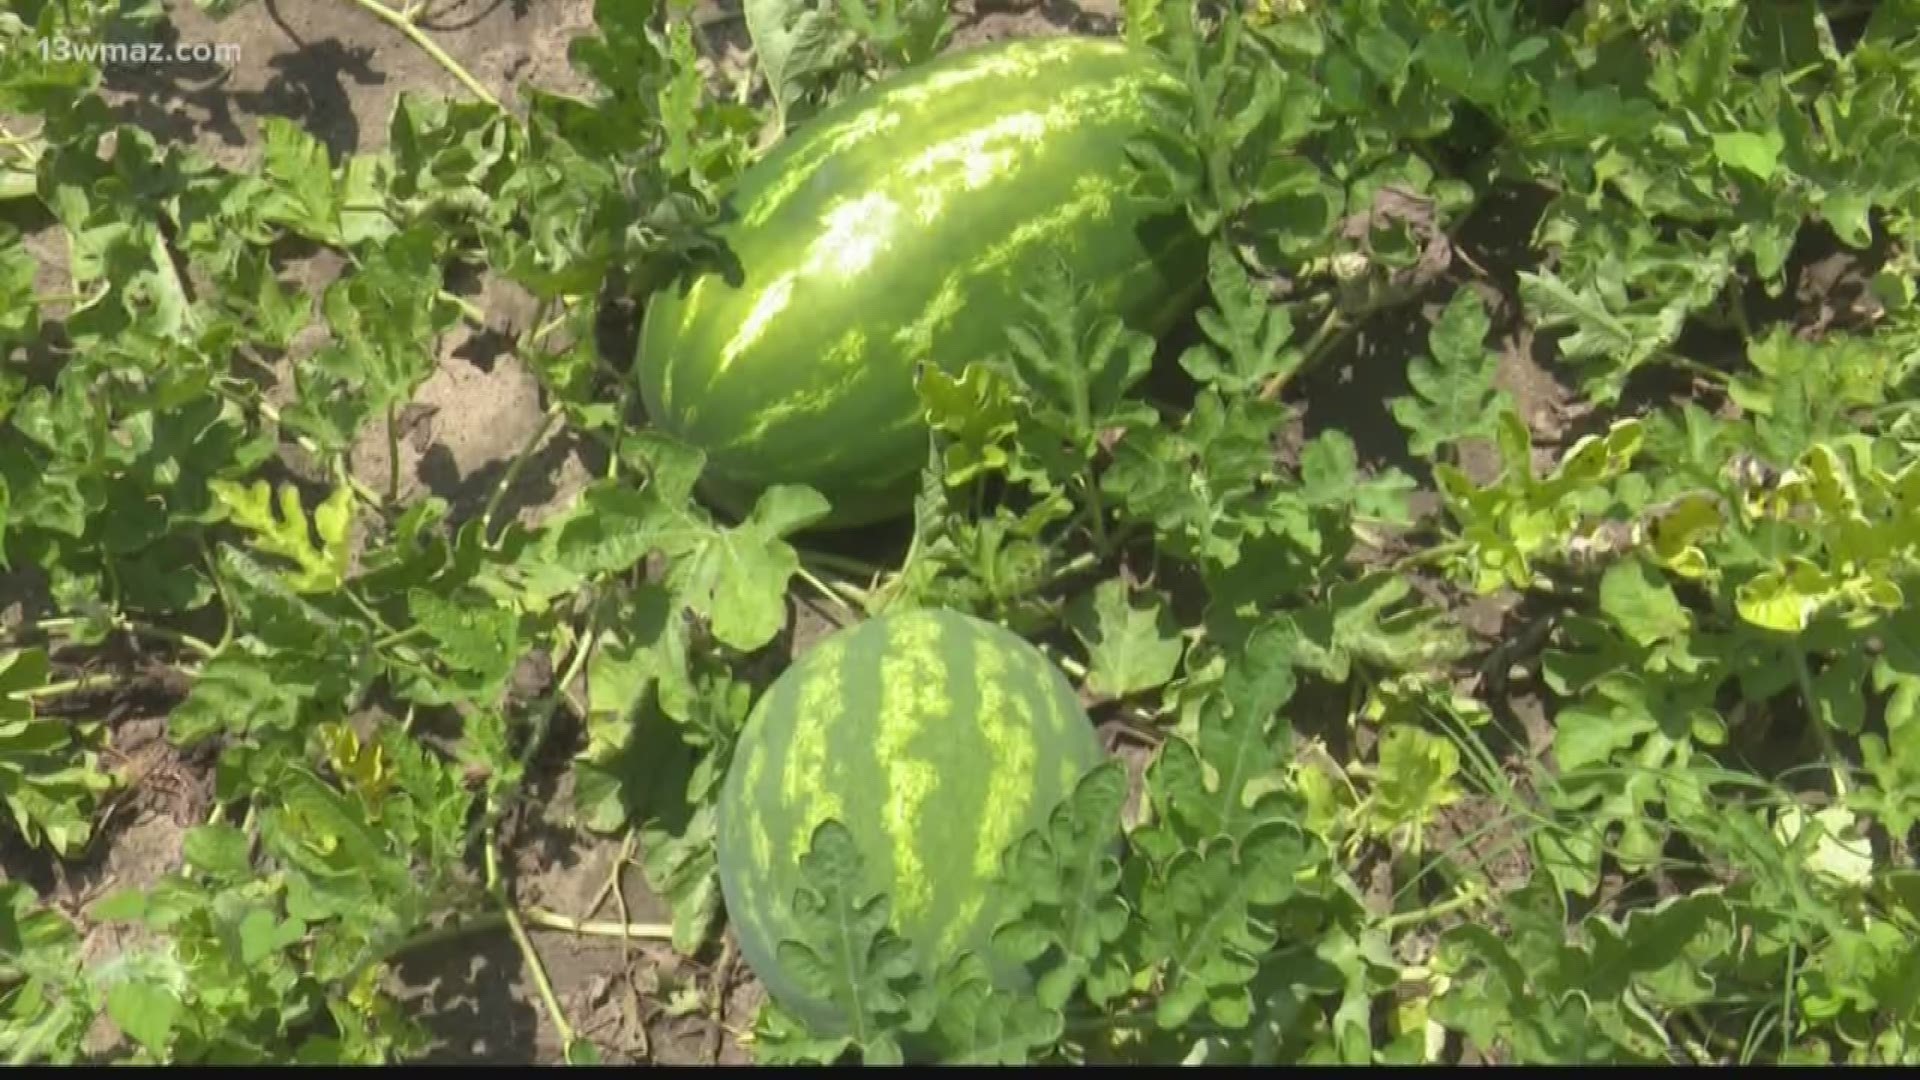 Every June, Cordele stakes its claim as the 'Watermelon Capitol of the World' with its Watermelon Days Festival. In its 70th year, farmers say it takes a lot of work to stay on top.